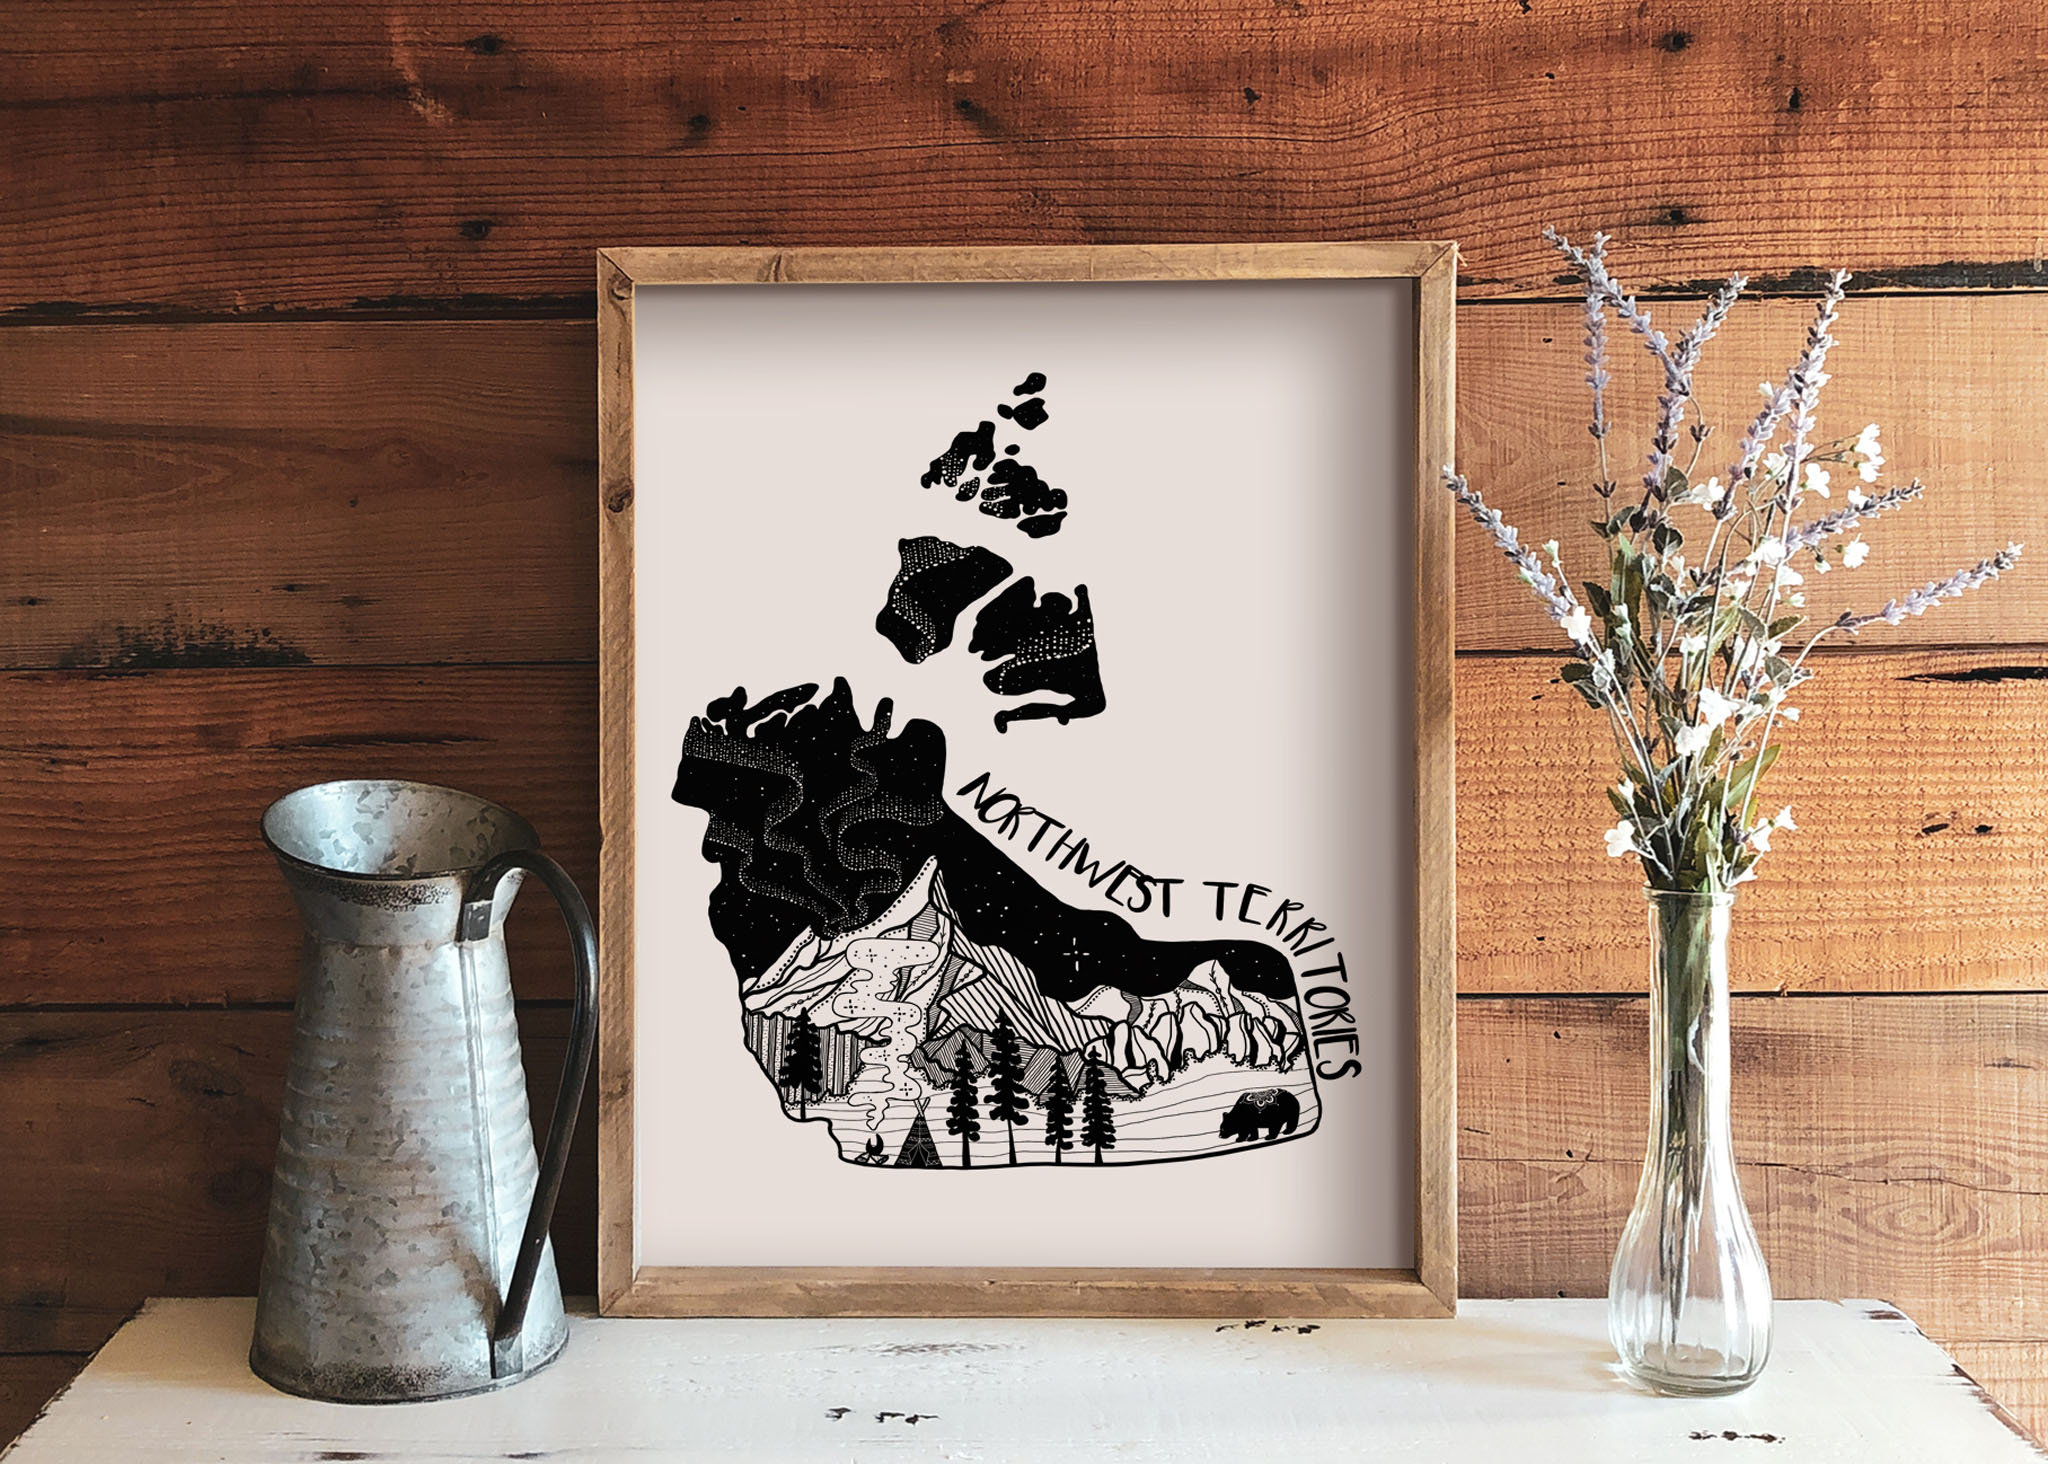 Mountain and Sun, Black and White Stickers, Waterproof Stickers for  Bottles, Wanderlust Stickers, Mountain Stickers, Aesthetic Decal, PNW 